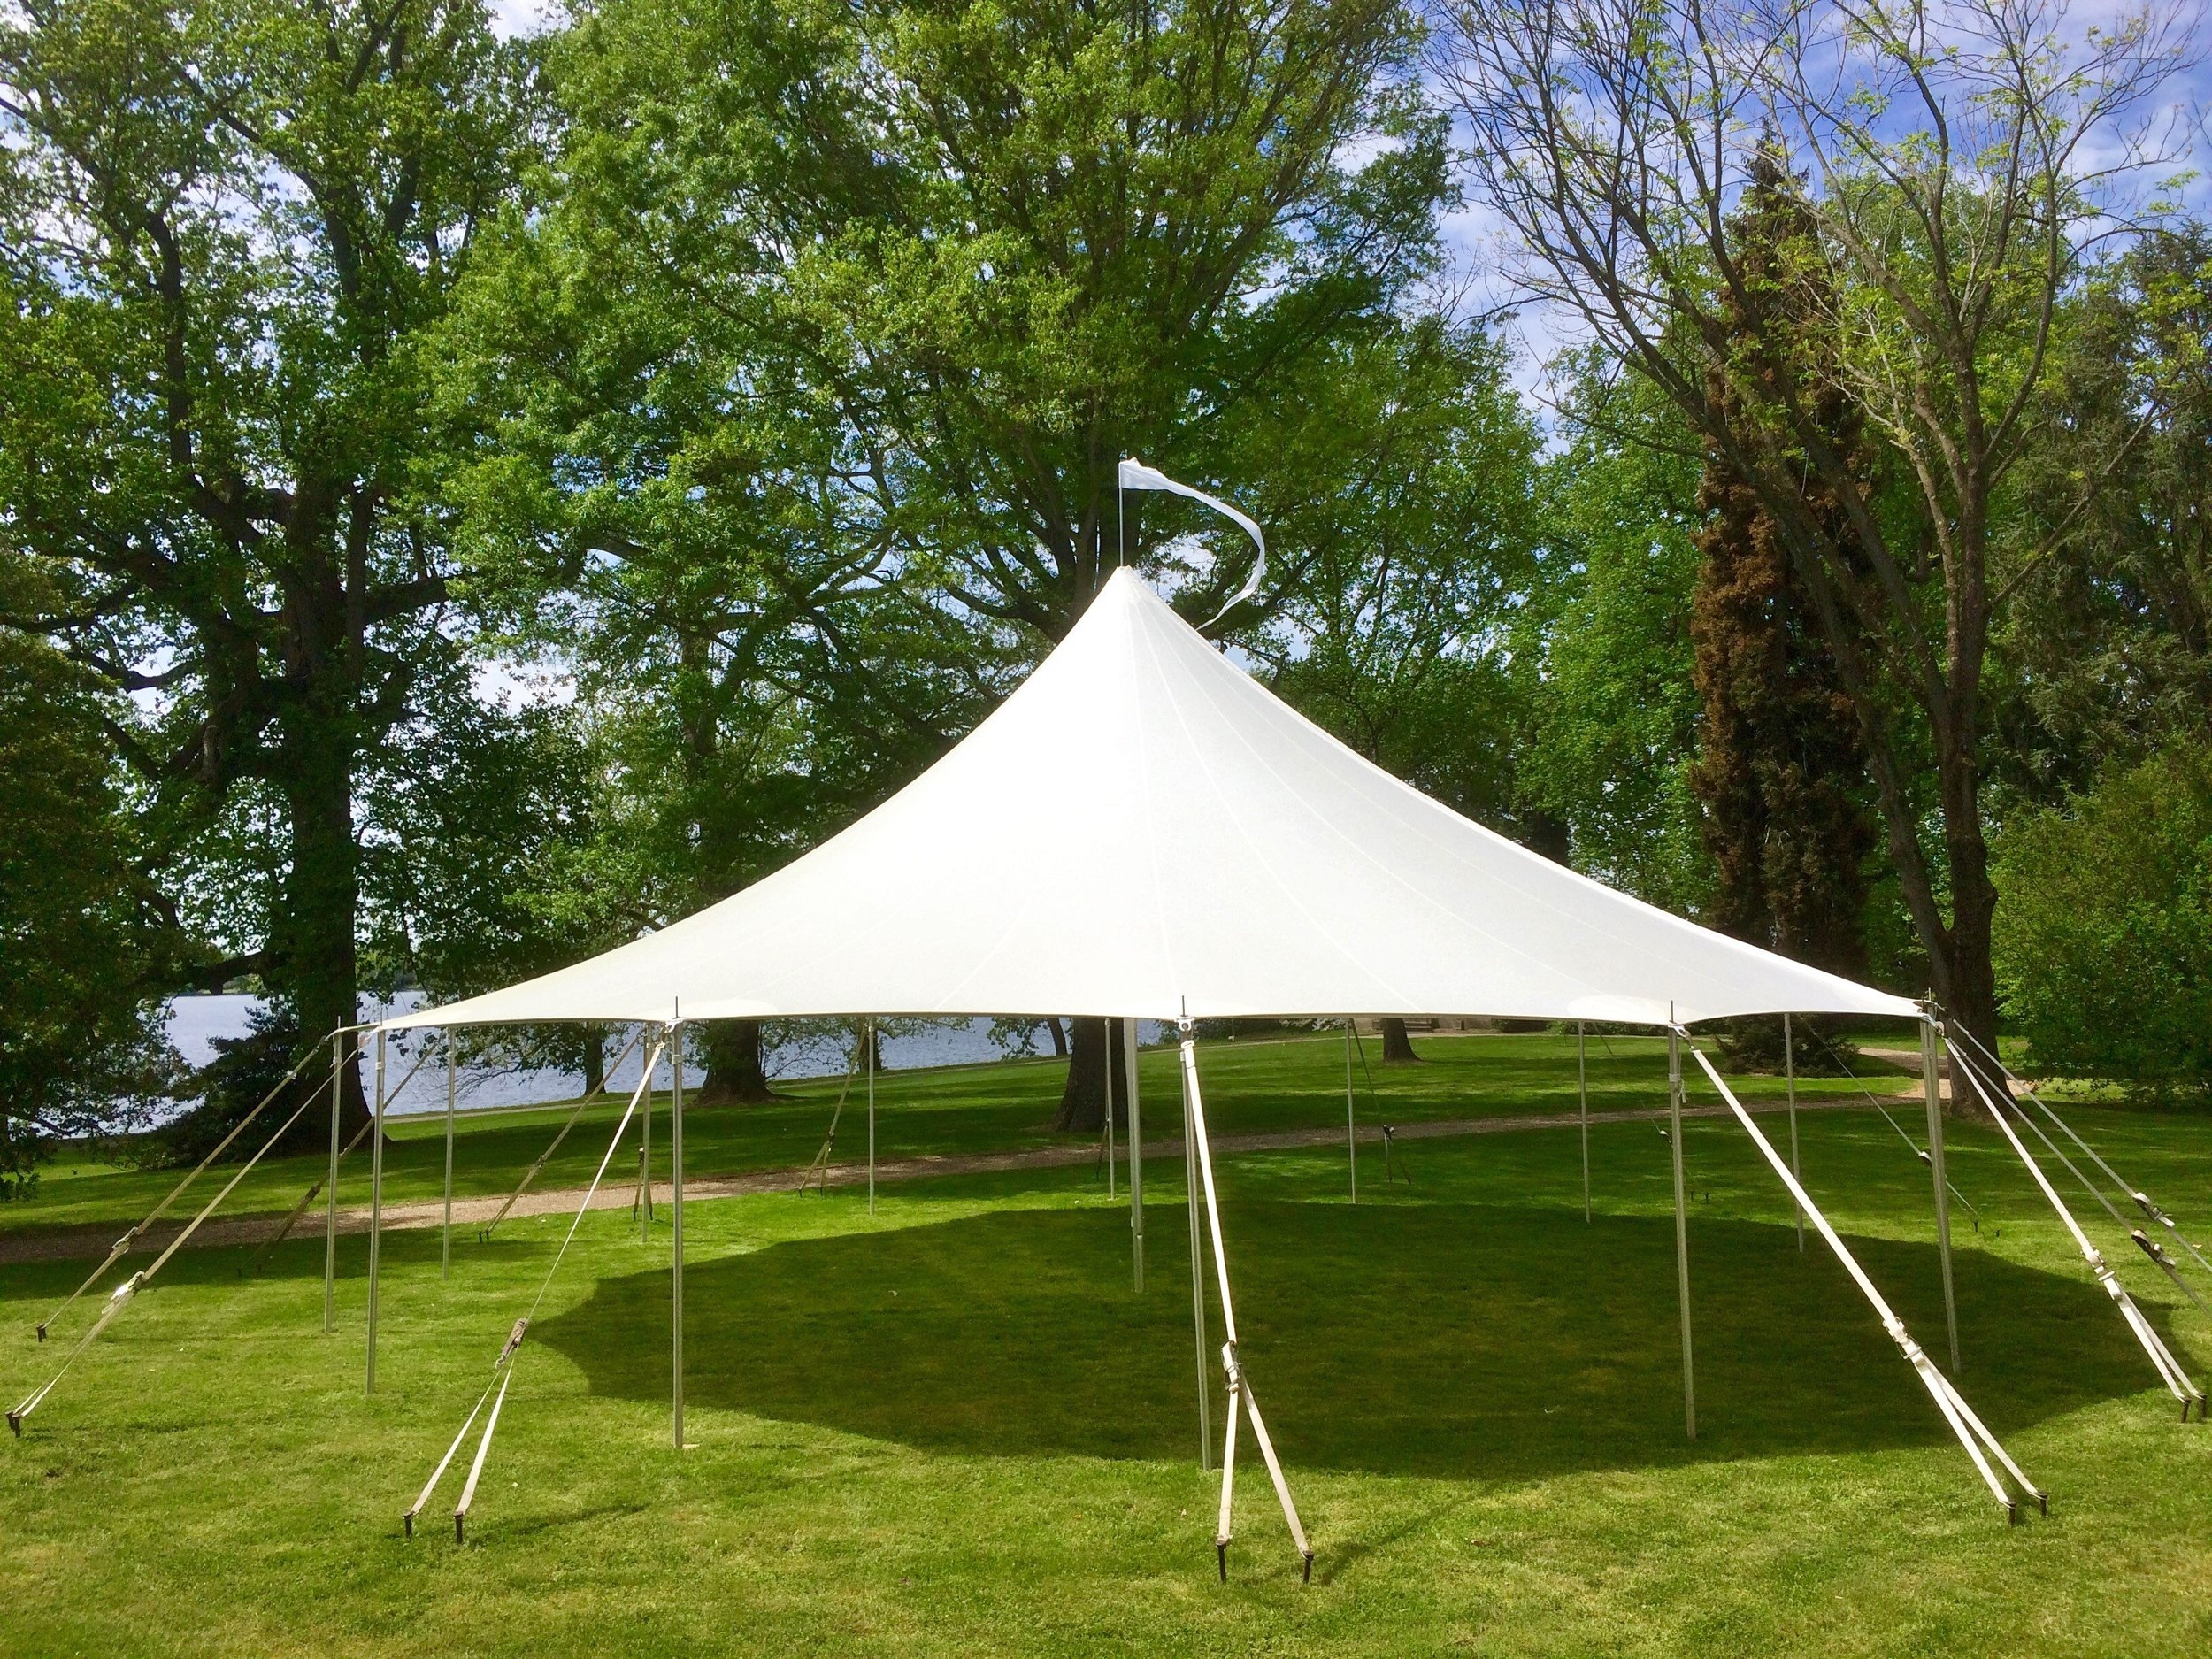 Beautiful sailcloth tent for rent in Cherry Hill, NJ